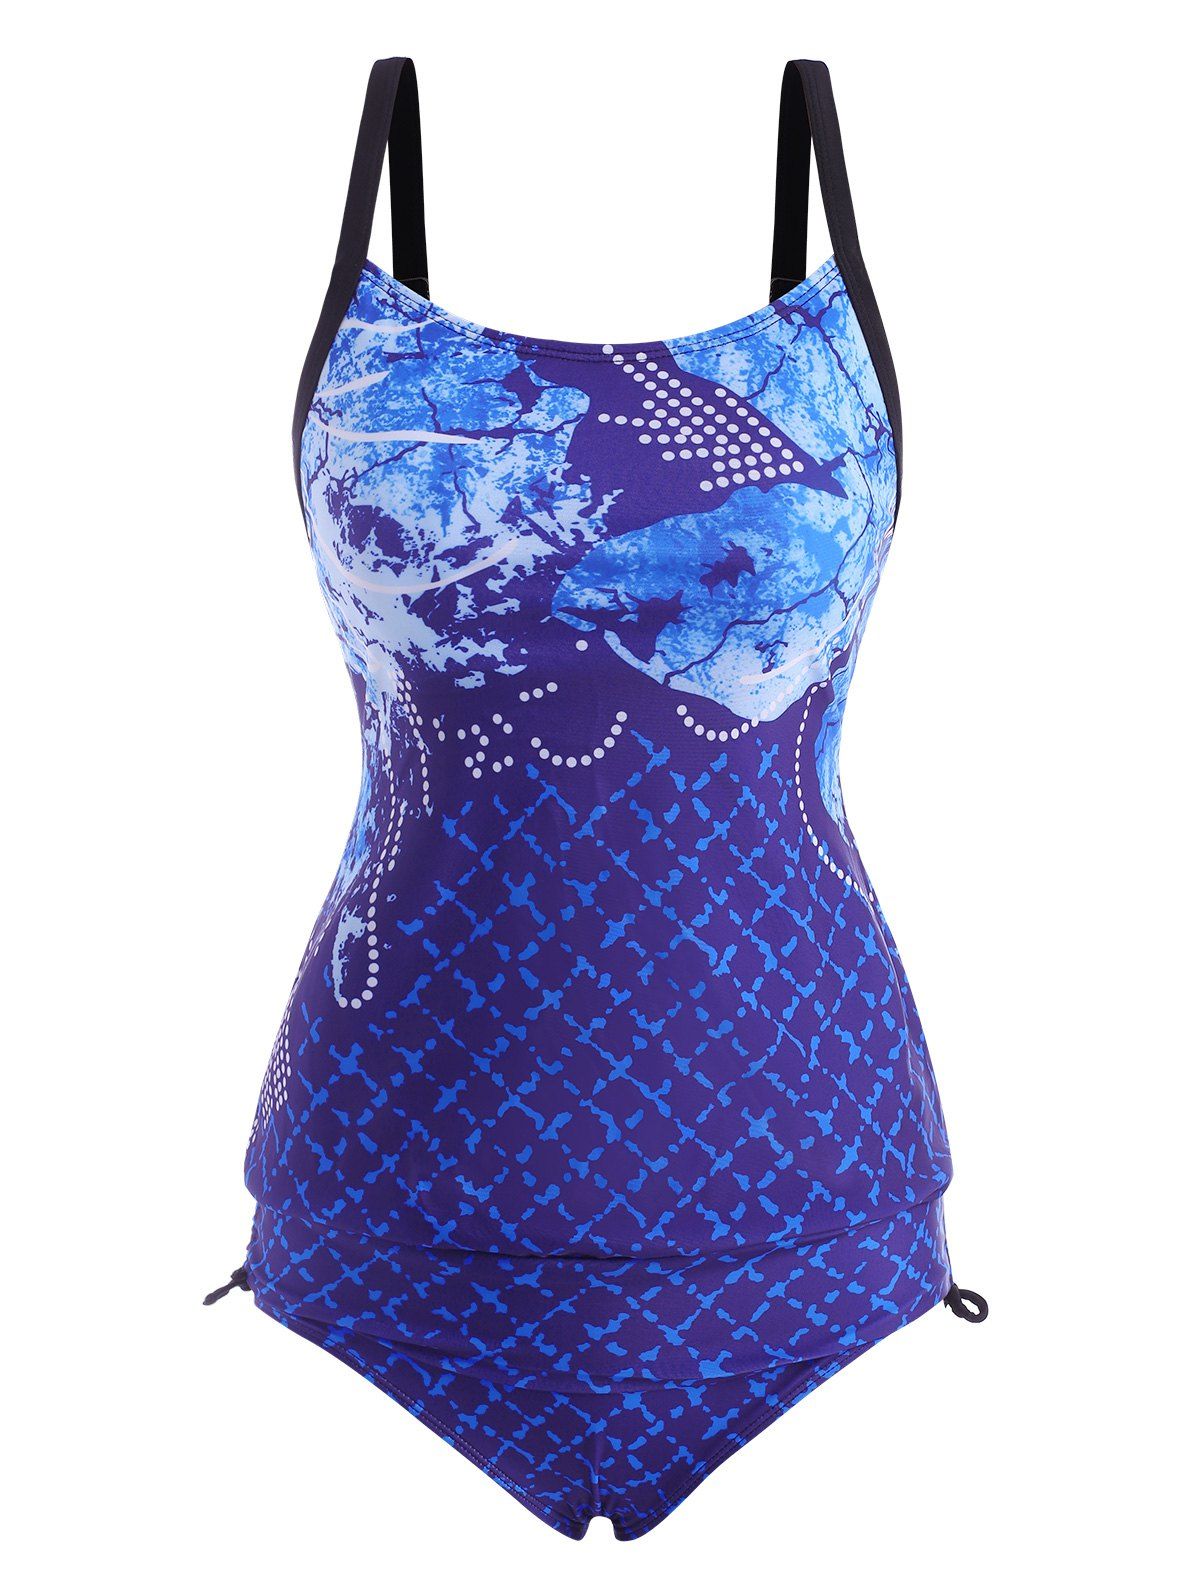 Cinched Side Floral Dotted Checked Tankini Swimwear - DEEP BLUE XL